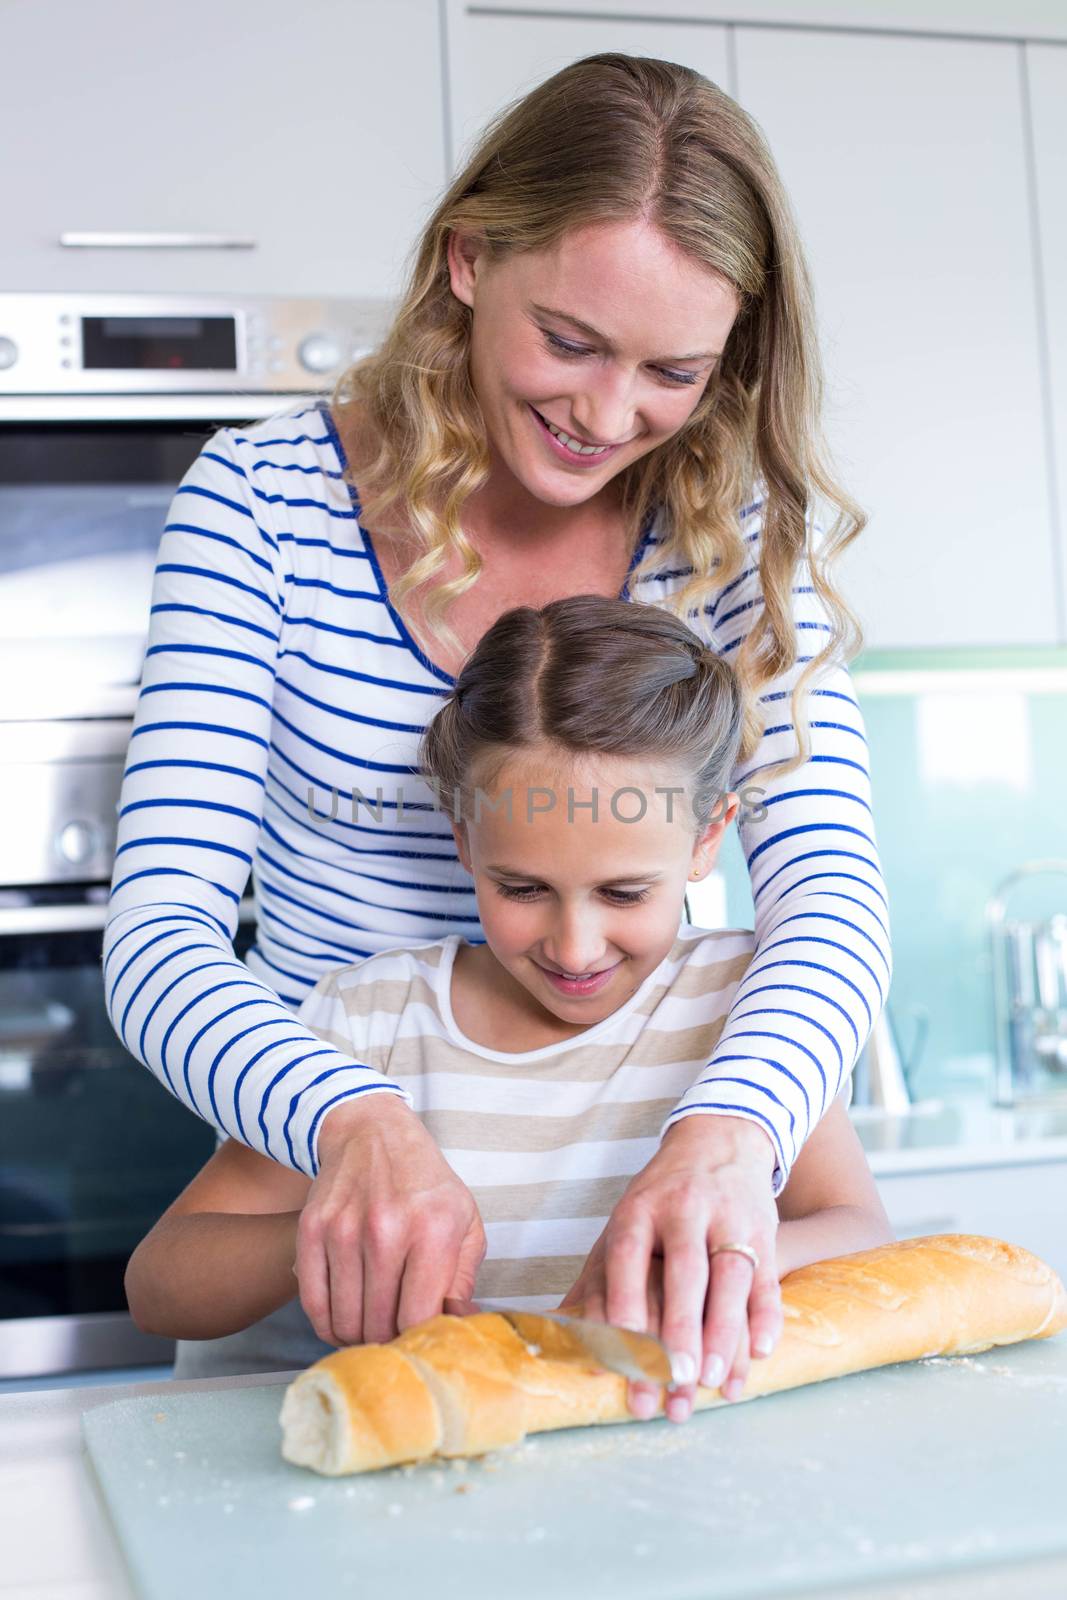 Happy family preparing lunch together by Wavebreakmedia